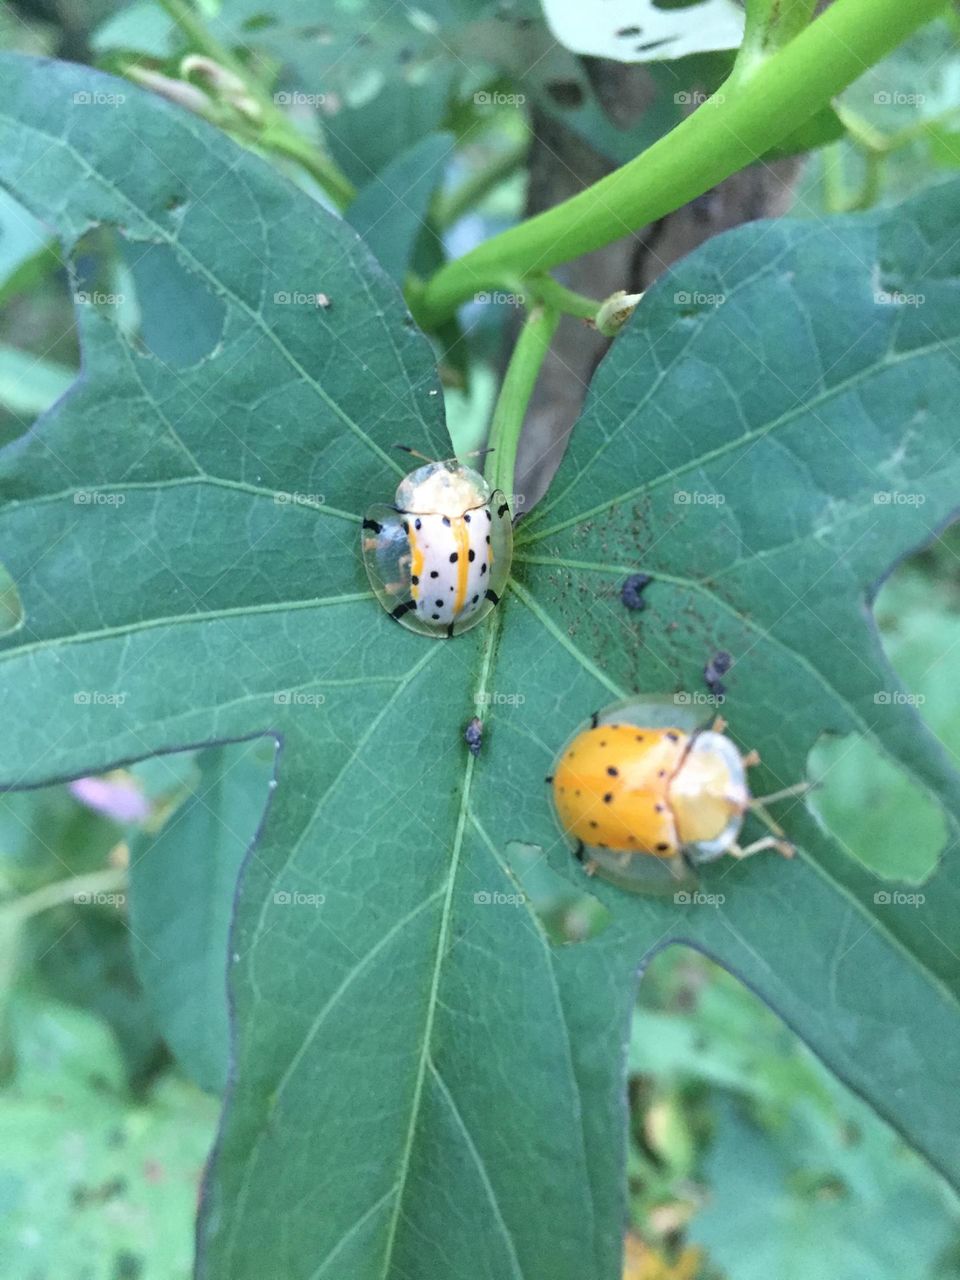 These two tiny insects mating 